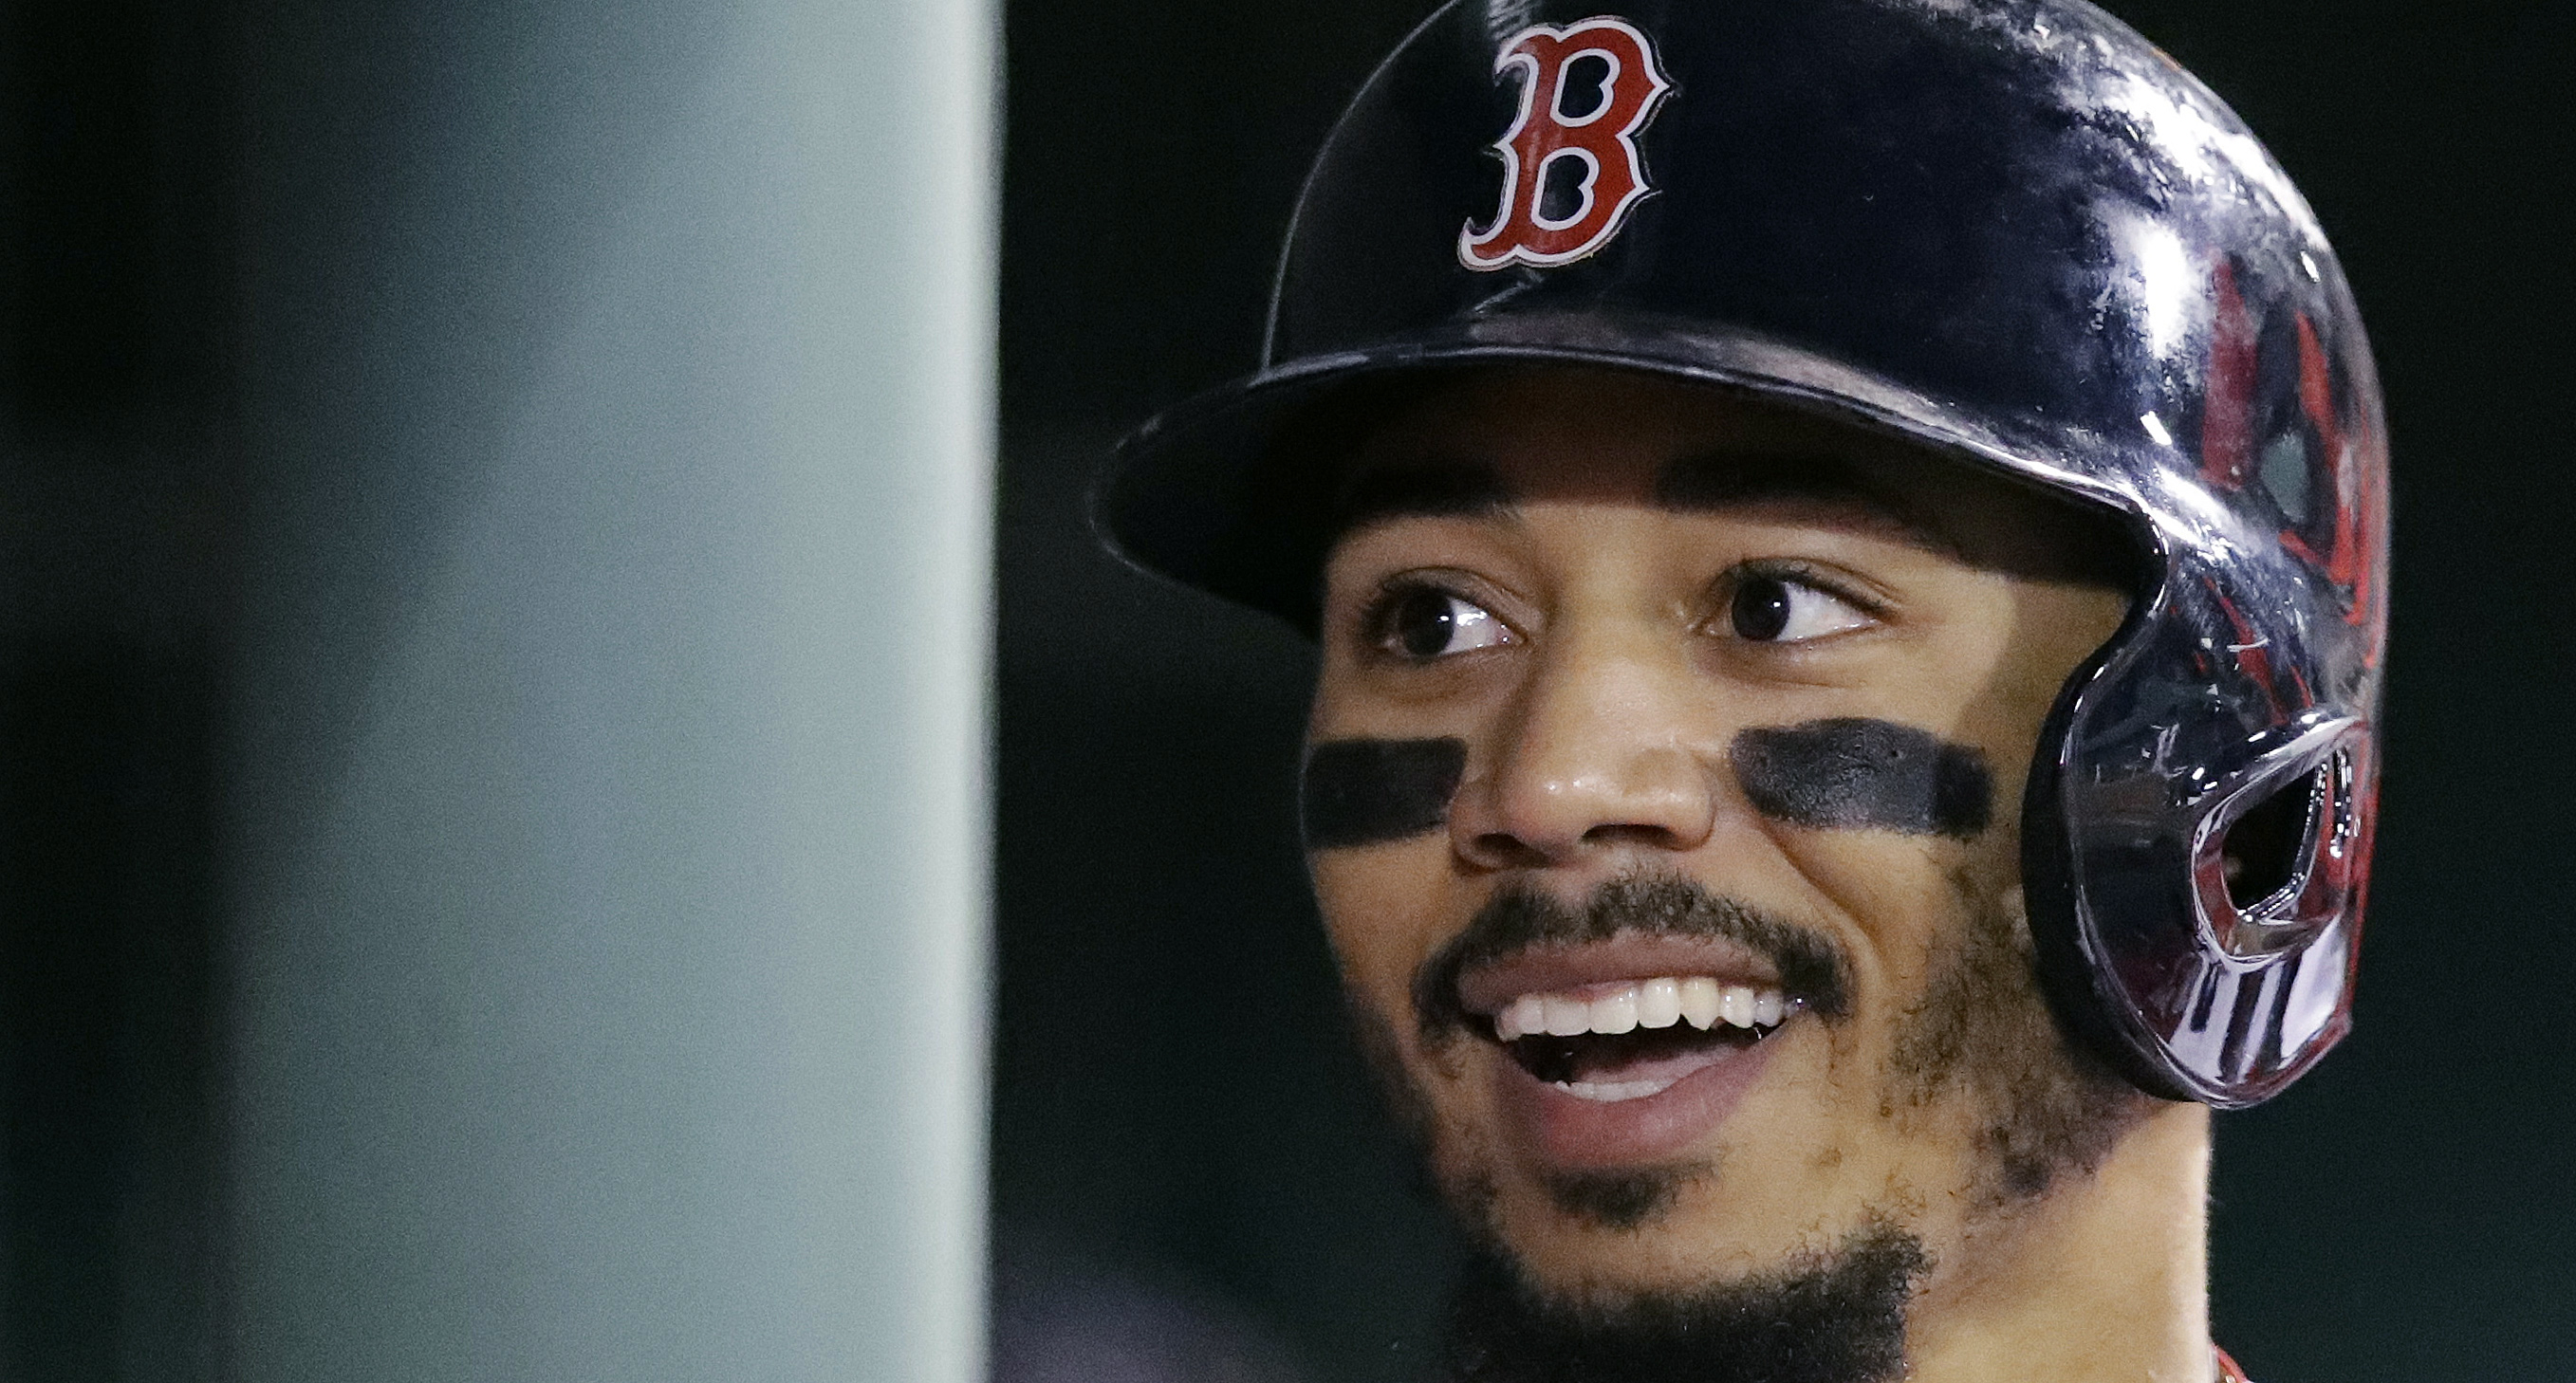 Red Sox OF Betts steals base, joins 30-30 club